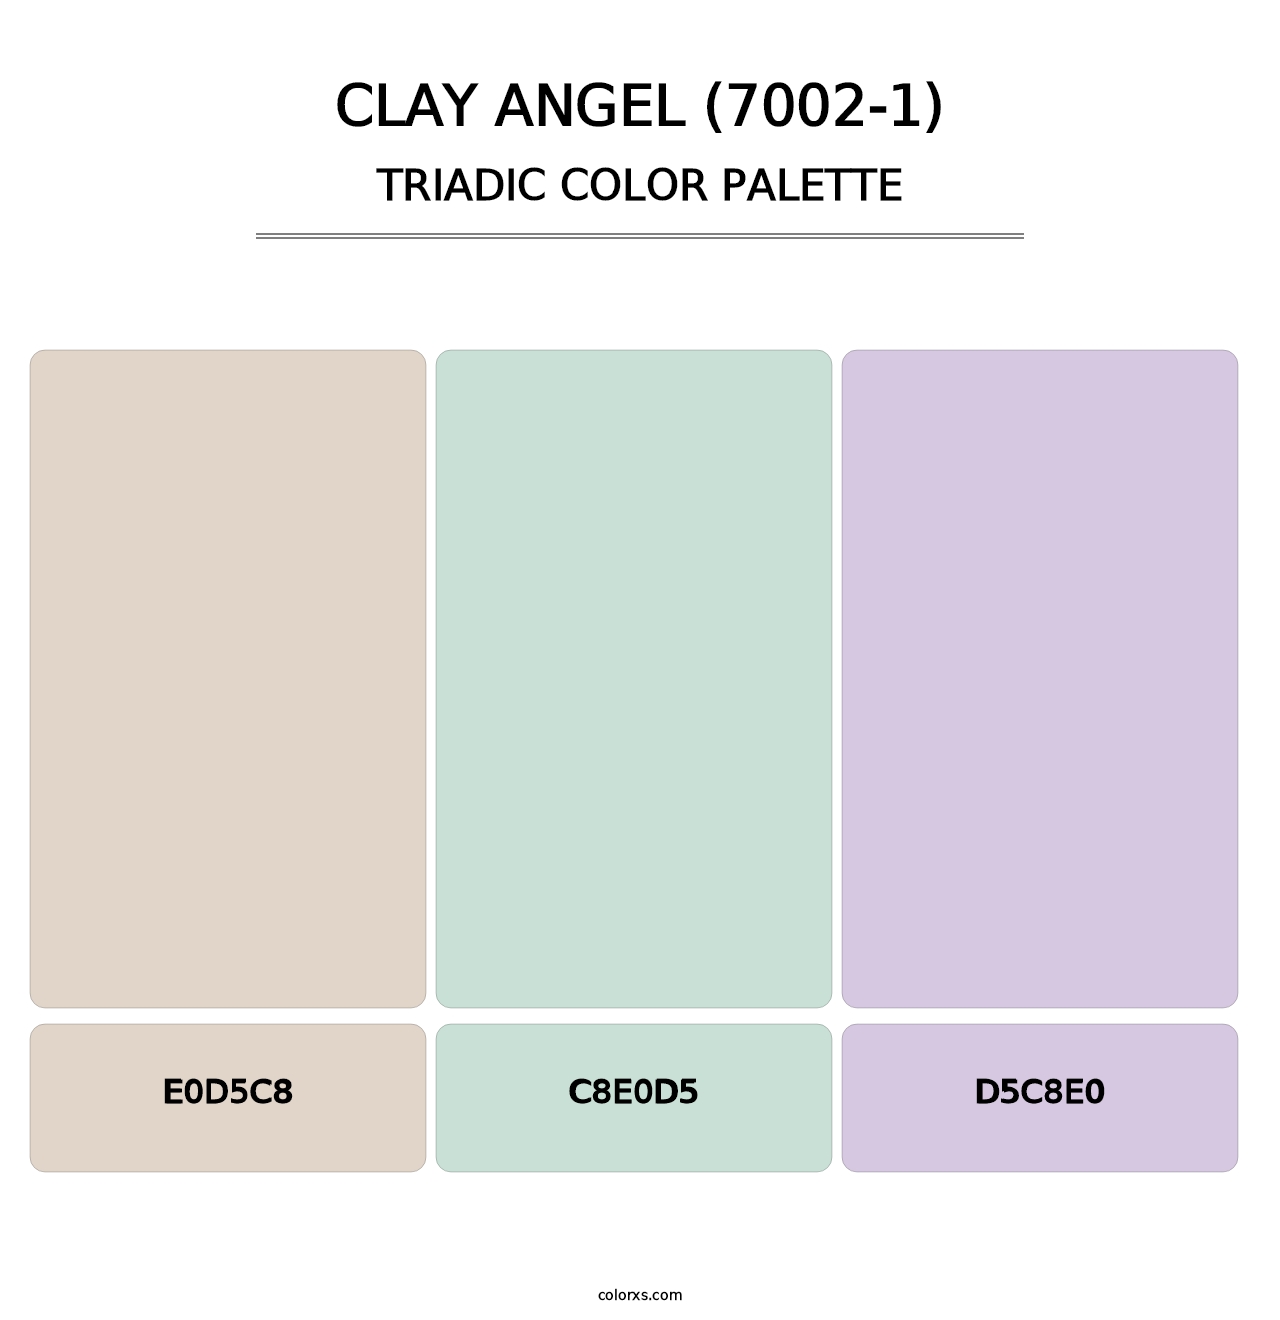 Clay Angel (7002-1) - Triadic Color Palette